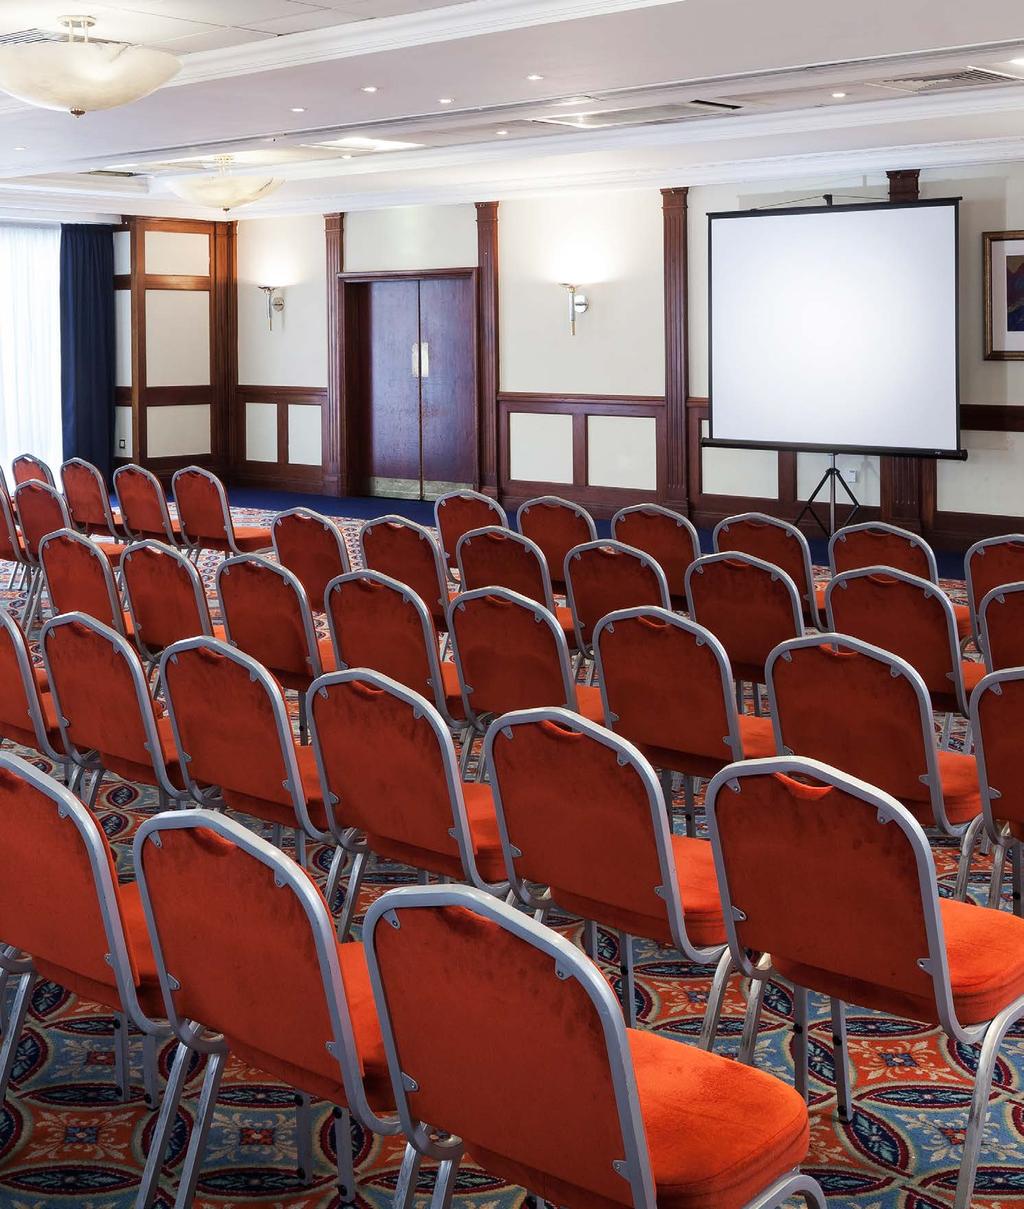 Meeting Facilities 11 Meeting and Event rooms, with capacities from 2-180 delegates Dedicated Meeting Centre and Cafe incorporating 6 Meeting Rooms Flexible delegate packages available to suit your